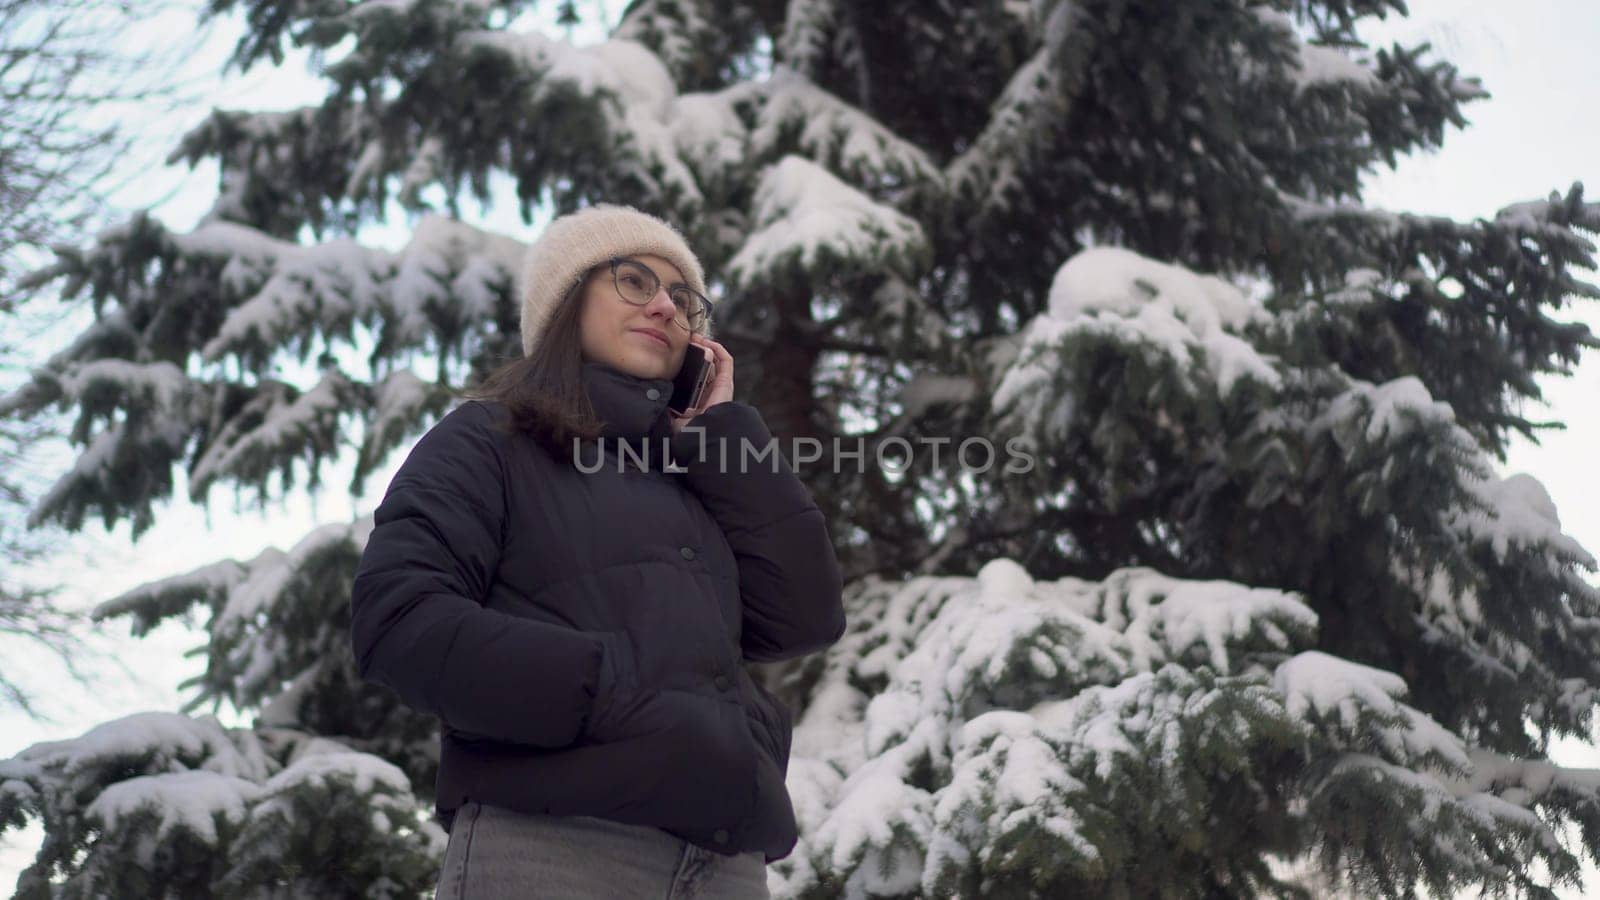 A young woman speaks on the phone near a tall spruce tree in winter. A girl with glasses communicates via cell phone against the backdrop of snowy spruce branches. by Puzankov